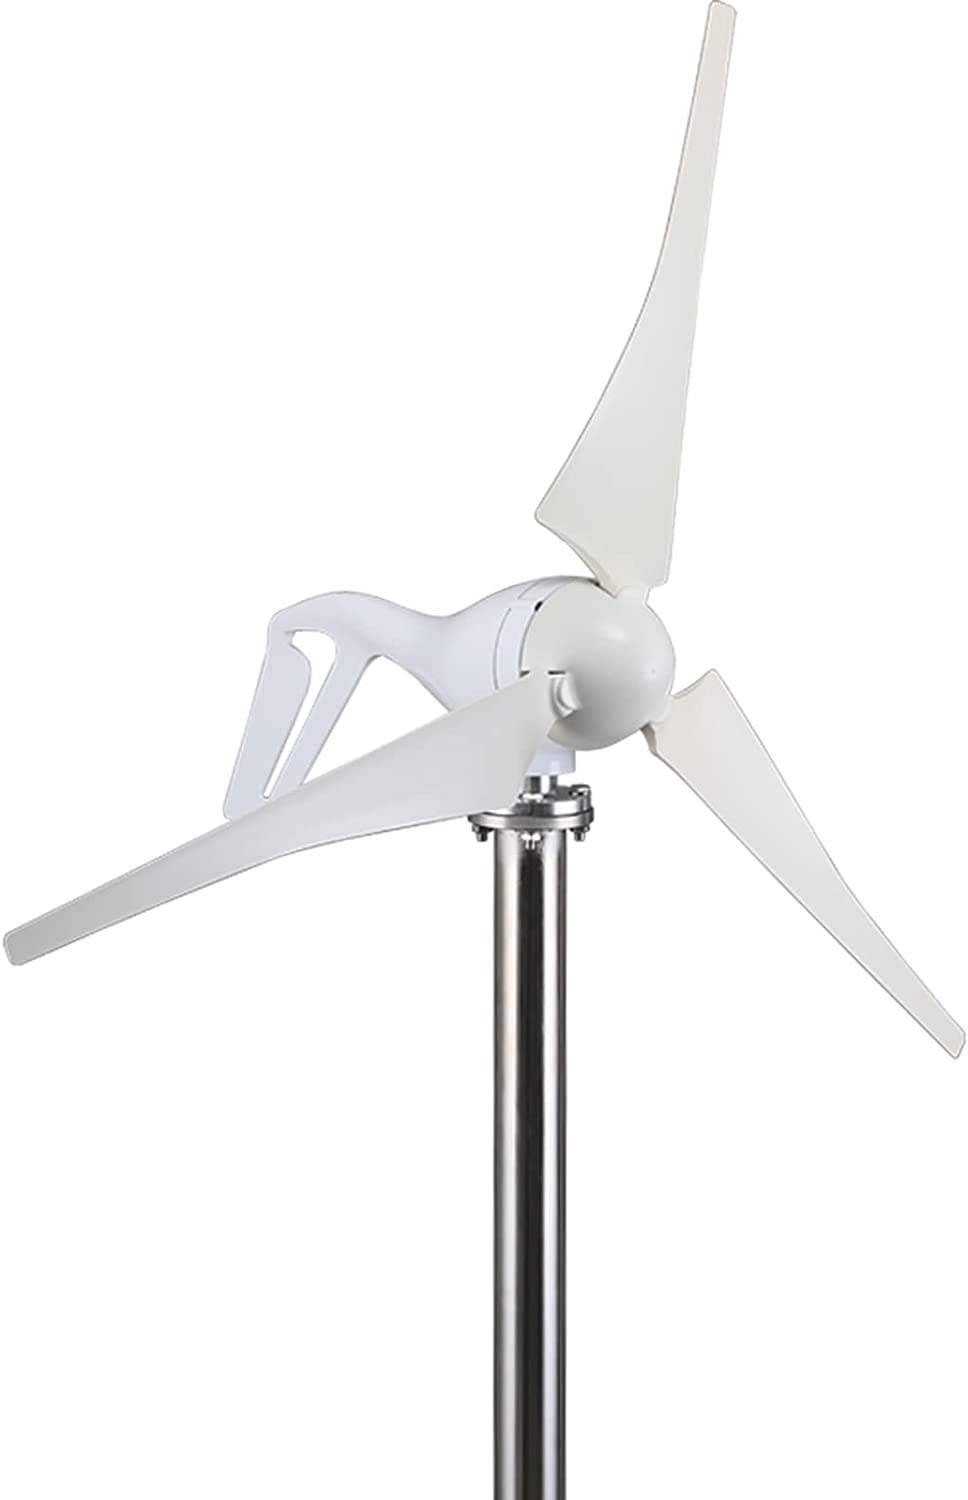 Smaraad Wind Turbine Generator Kit 600W 12V with 3 Blade, Wind Generator Kit with Charge Controller, Wind Power Generator for Marine, RV, Home, Windmill Generator Suit for Hybrid Solar Wind System